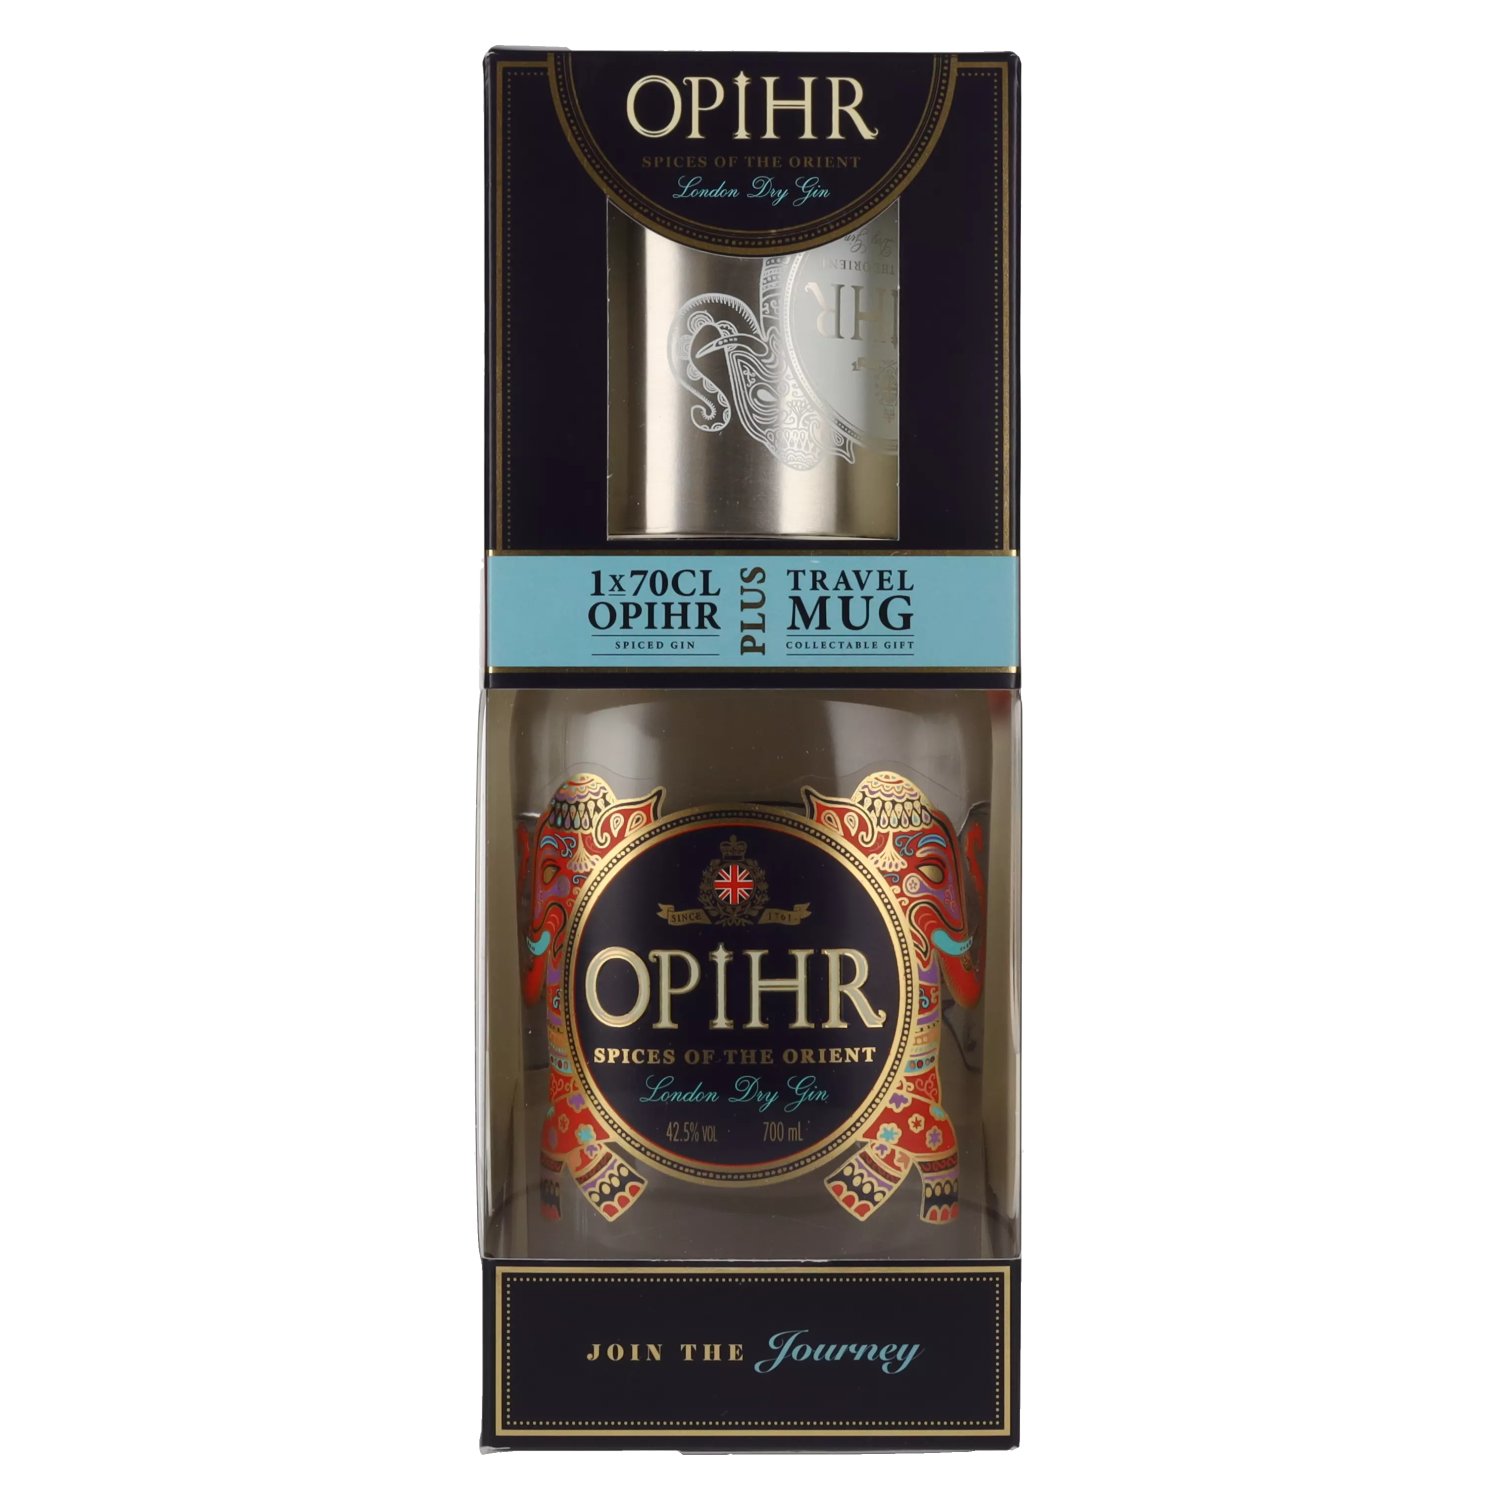 Opihr ORIENTAL SPICED London Dry Mug Gin Vol. 0,7l 42,5% with in Travel Giftbox